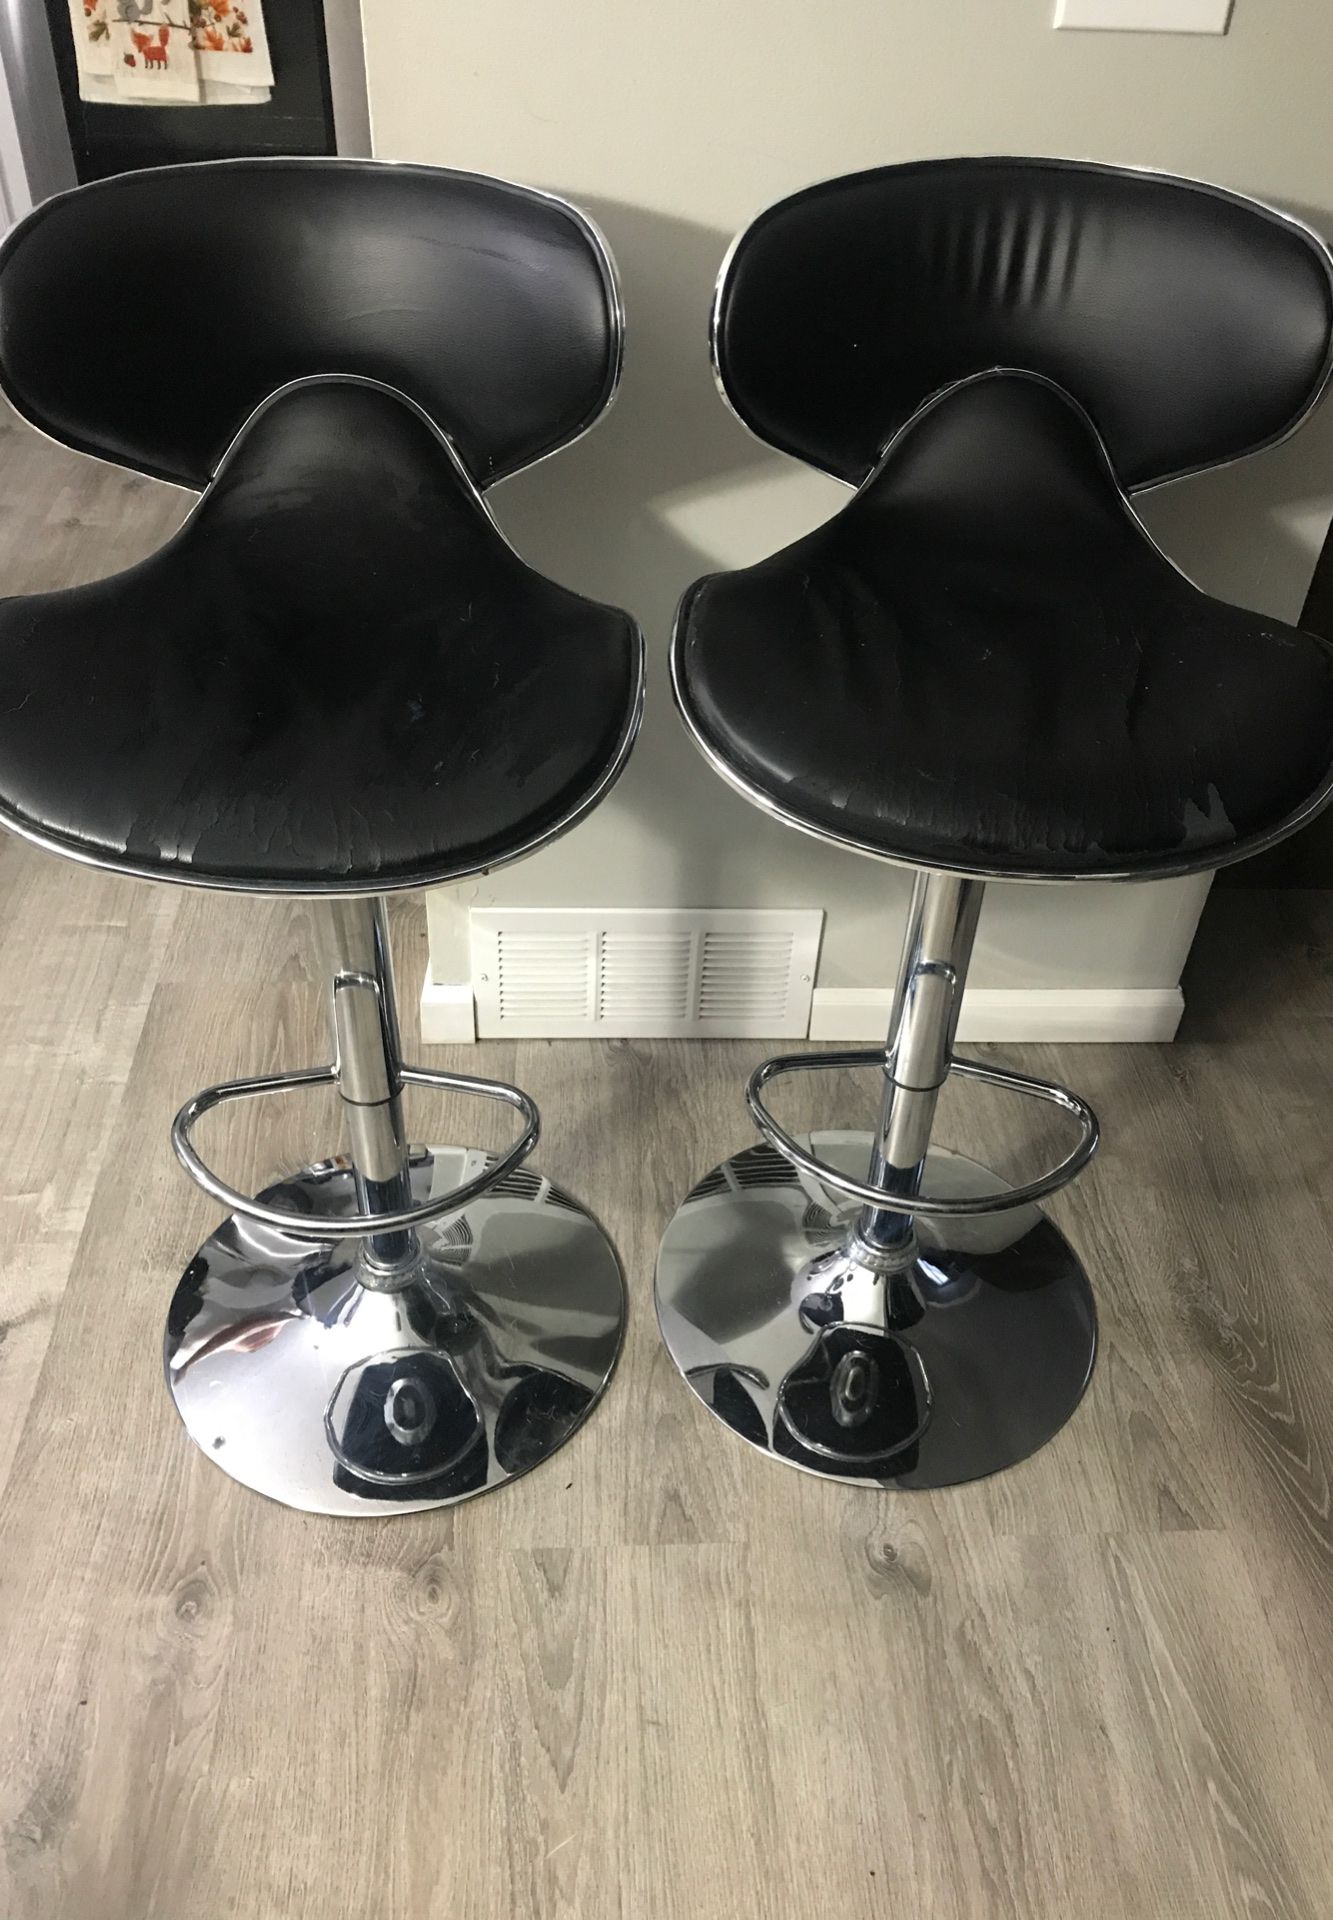 2 black and silver bar stools .Slight damage on seat part. Can adjust height.